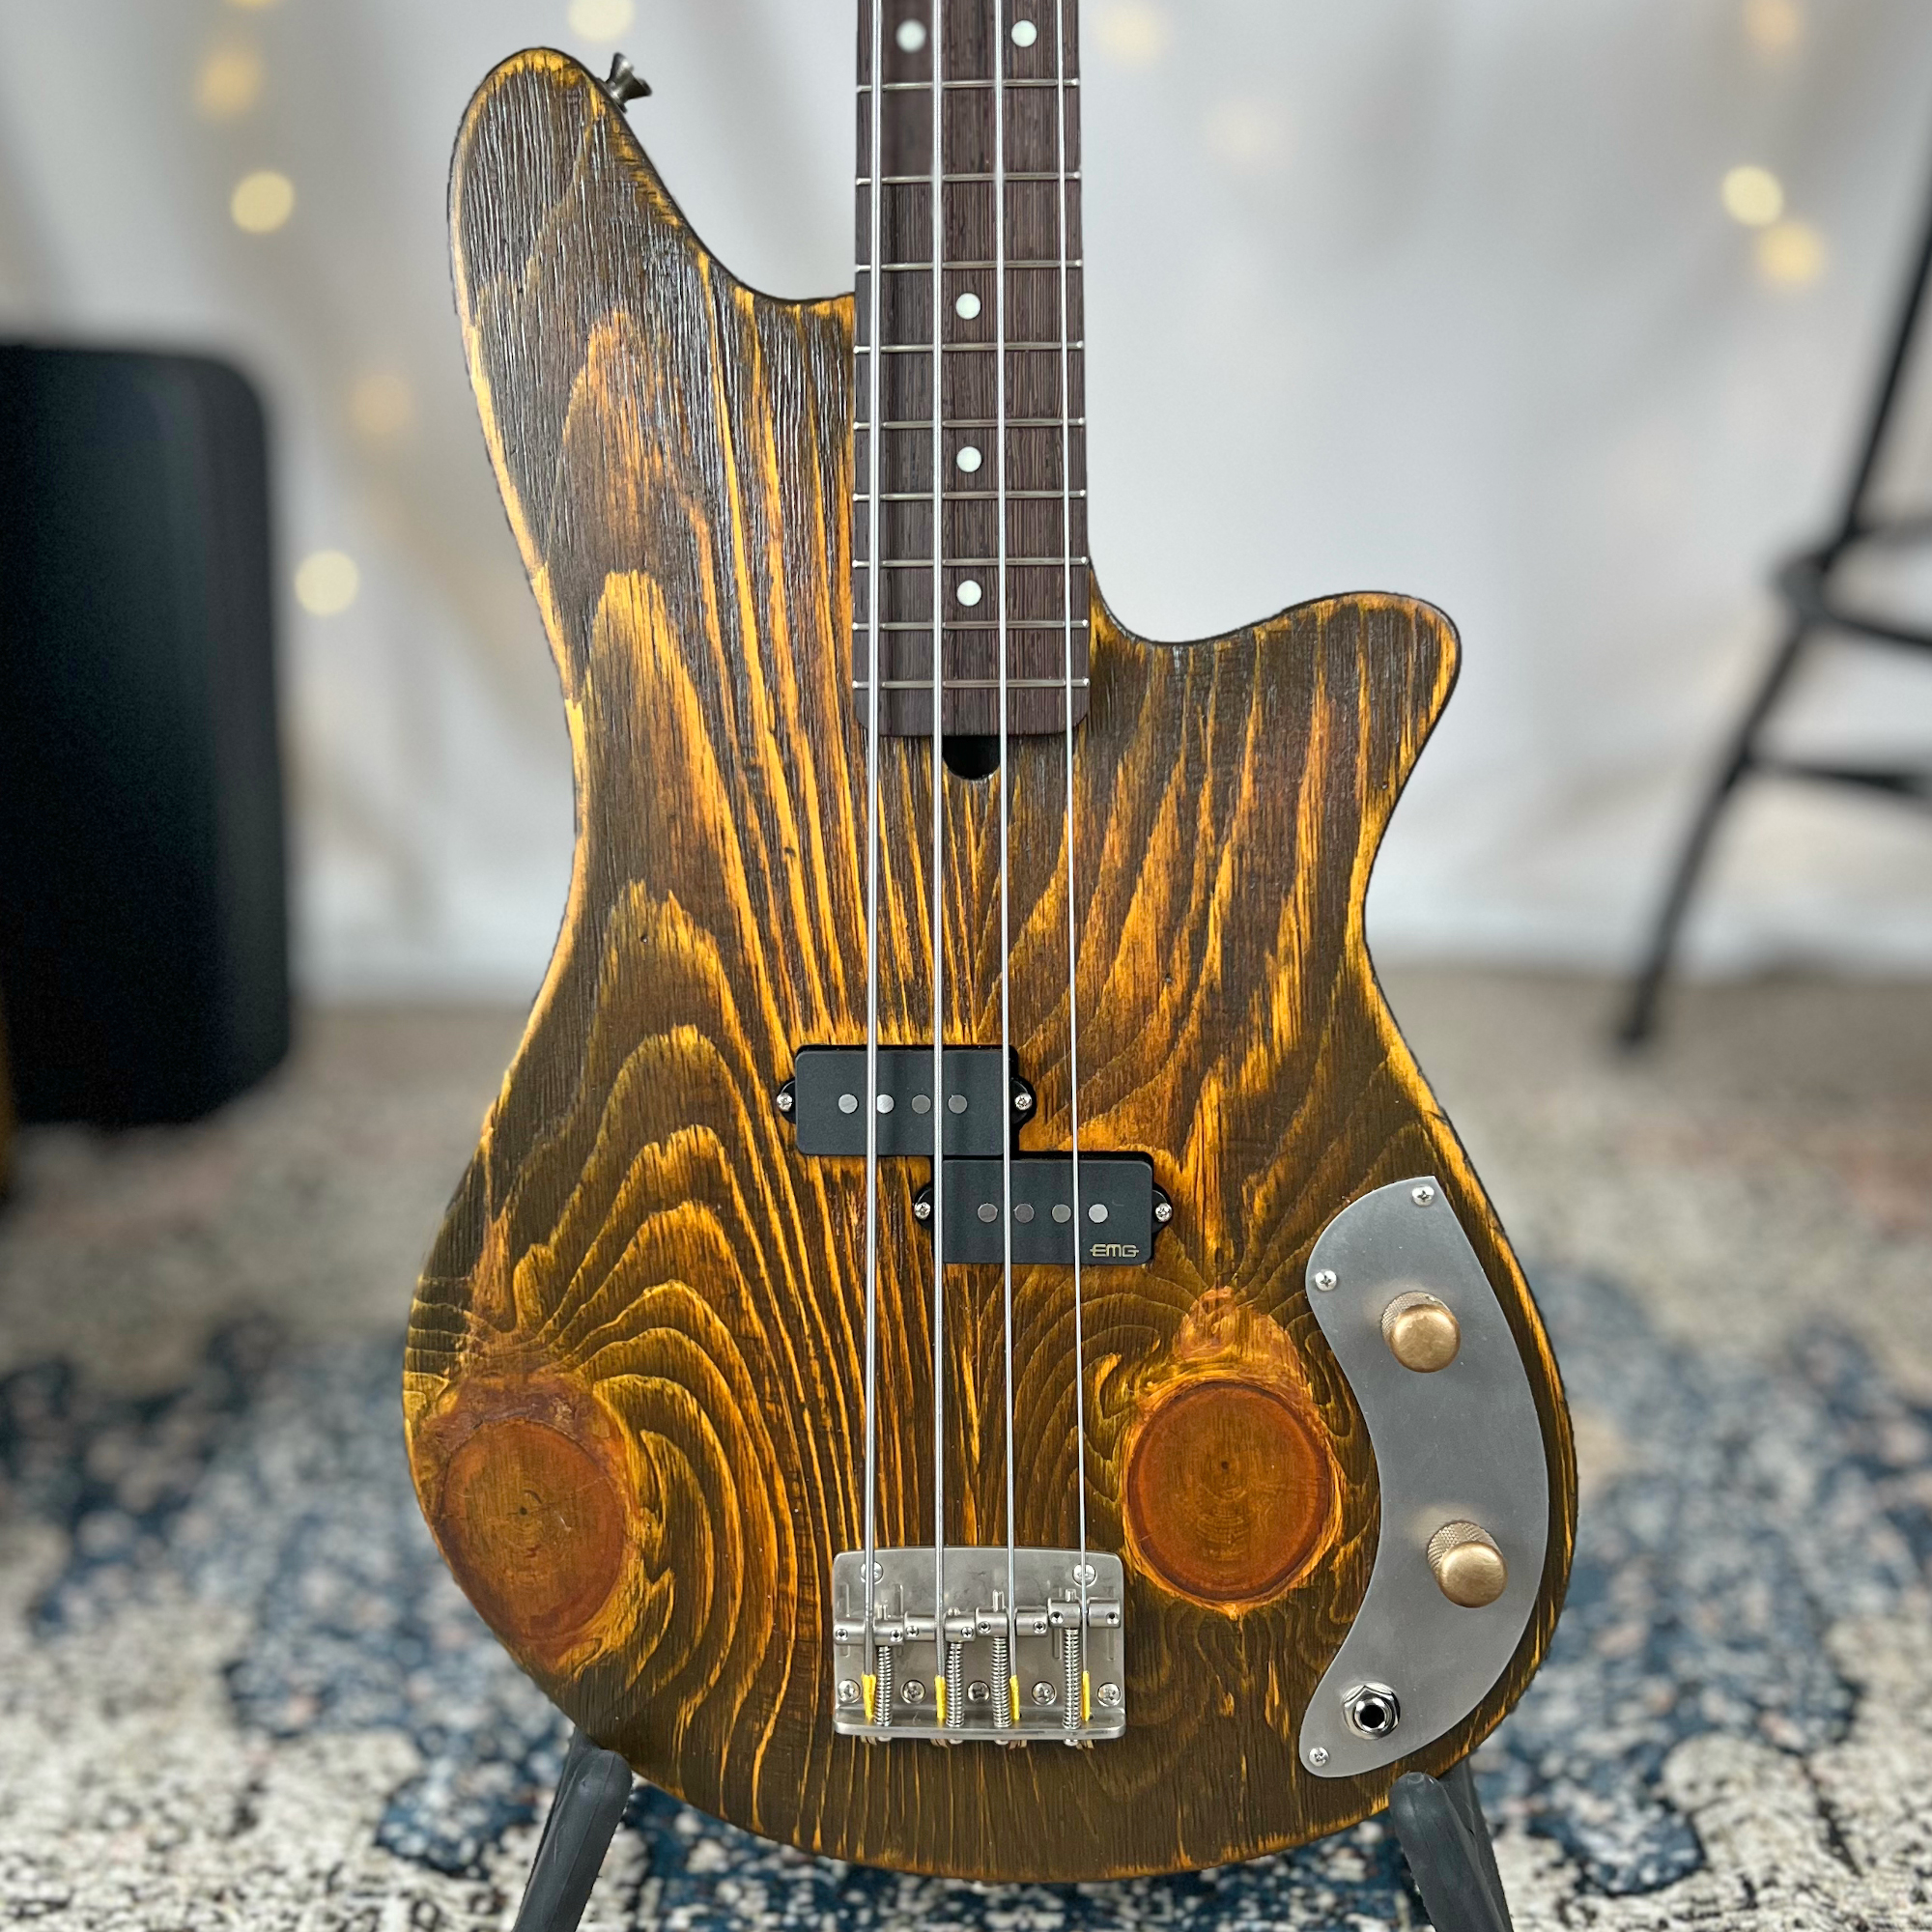 Shelby P 30" Short-Scale Bass in Salted Caramel on Distressed Pine with EMG Geezer Butler P Pickup